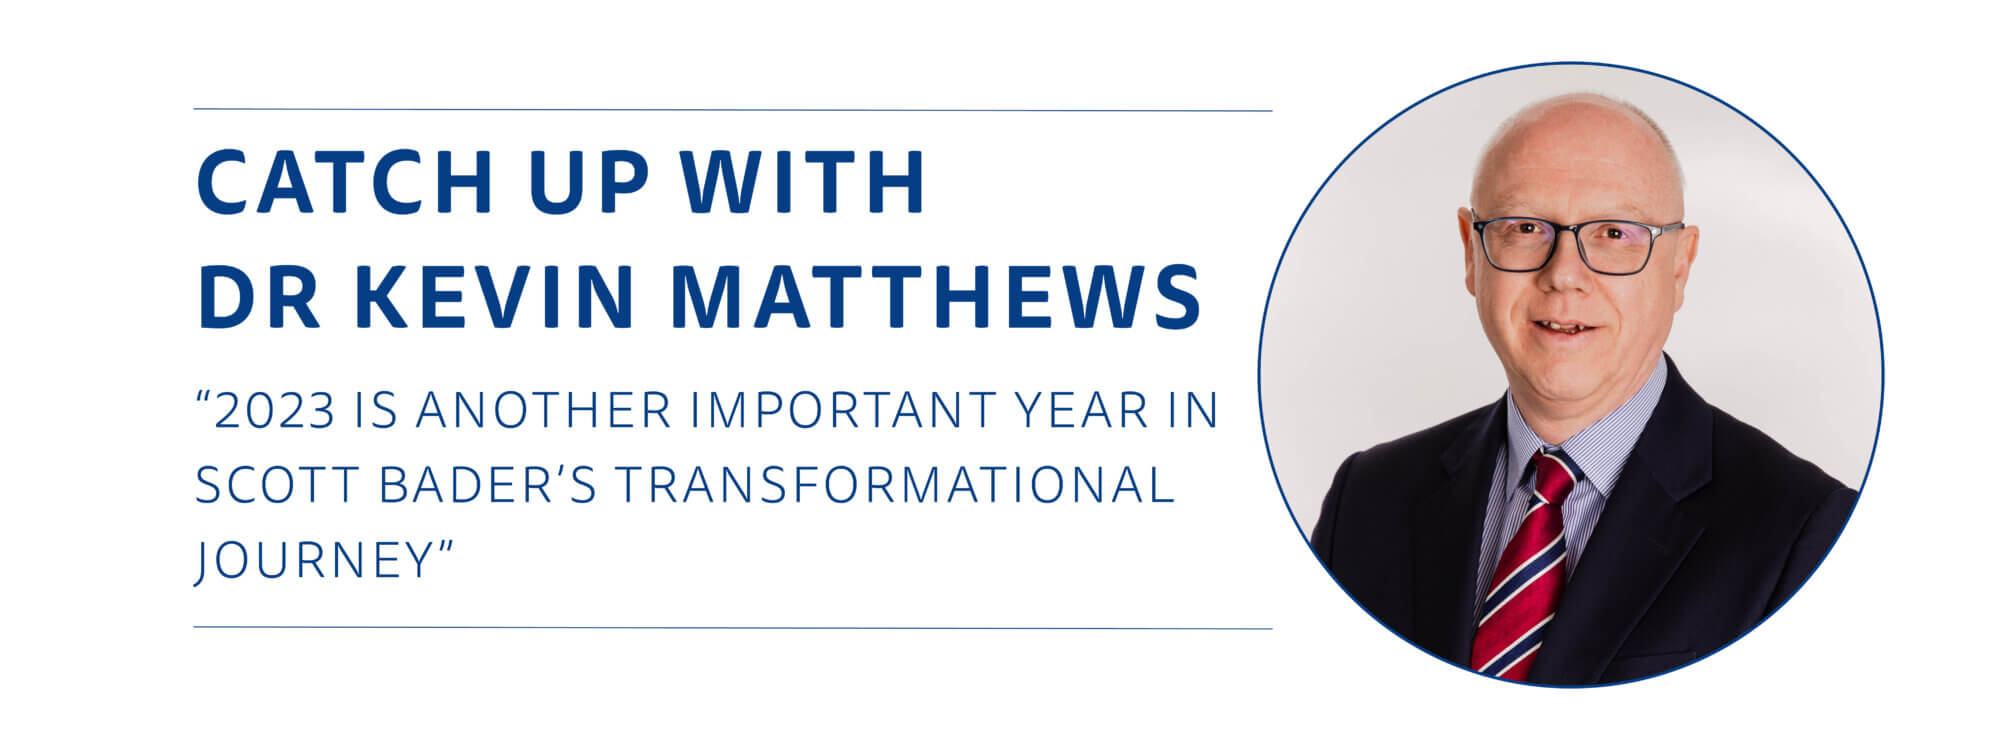 Catch up with Dr Kevin Matthews on 2023 at Scott Bader